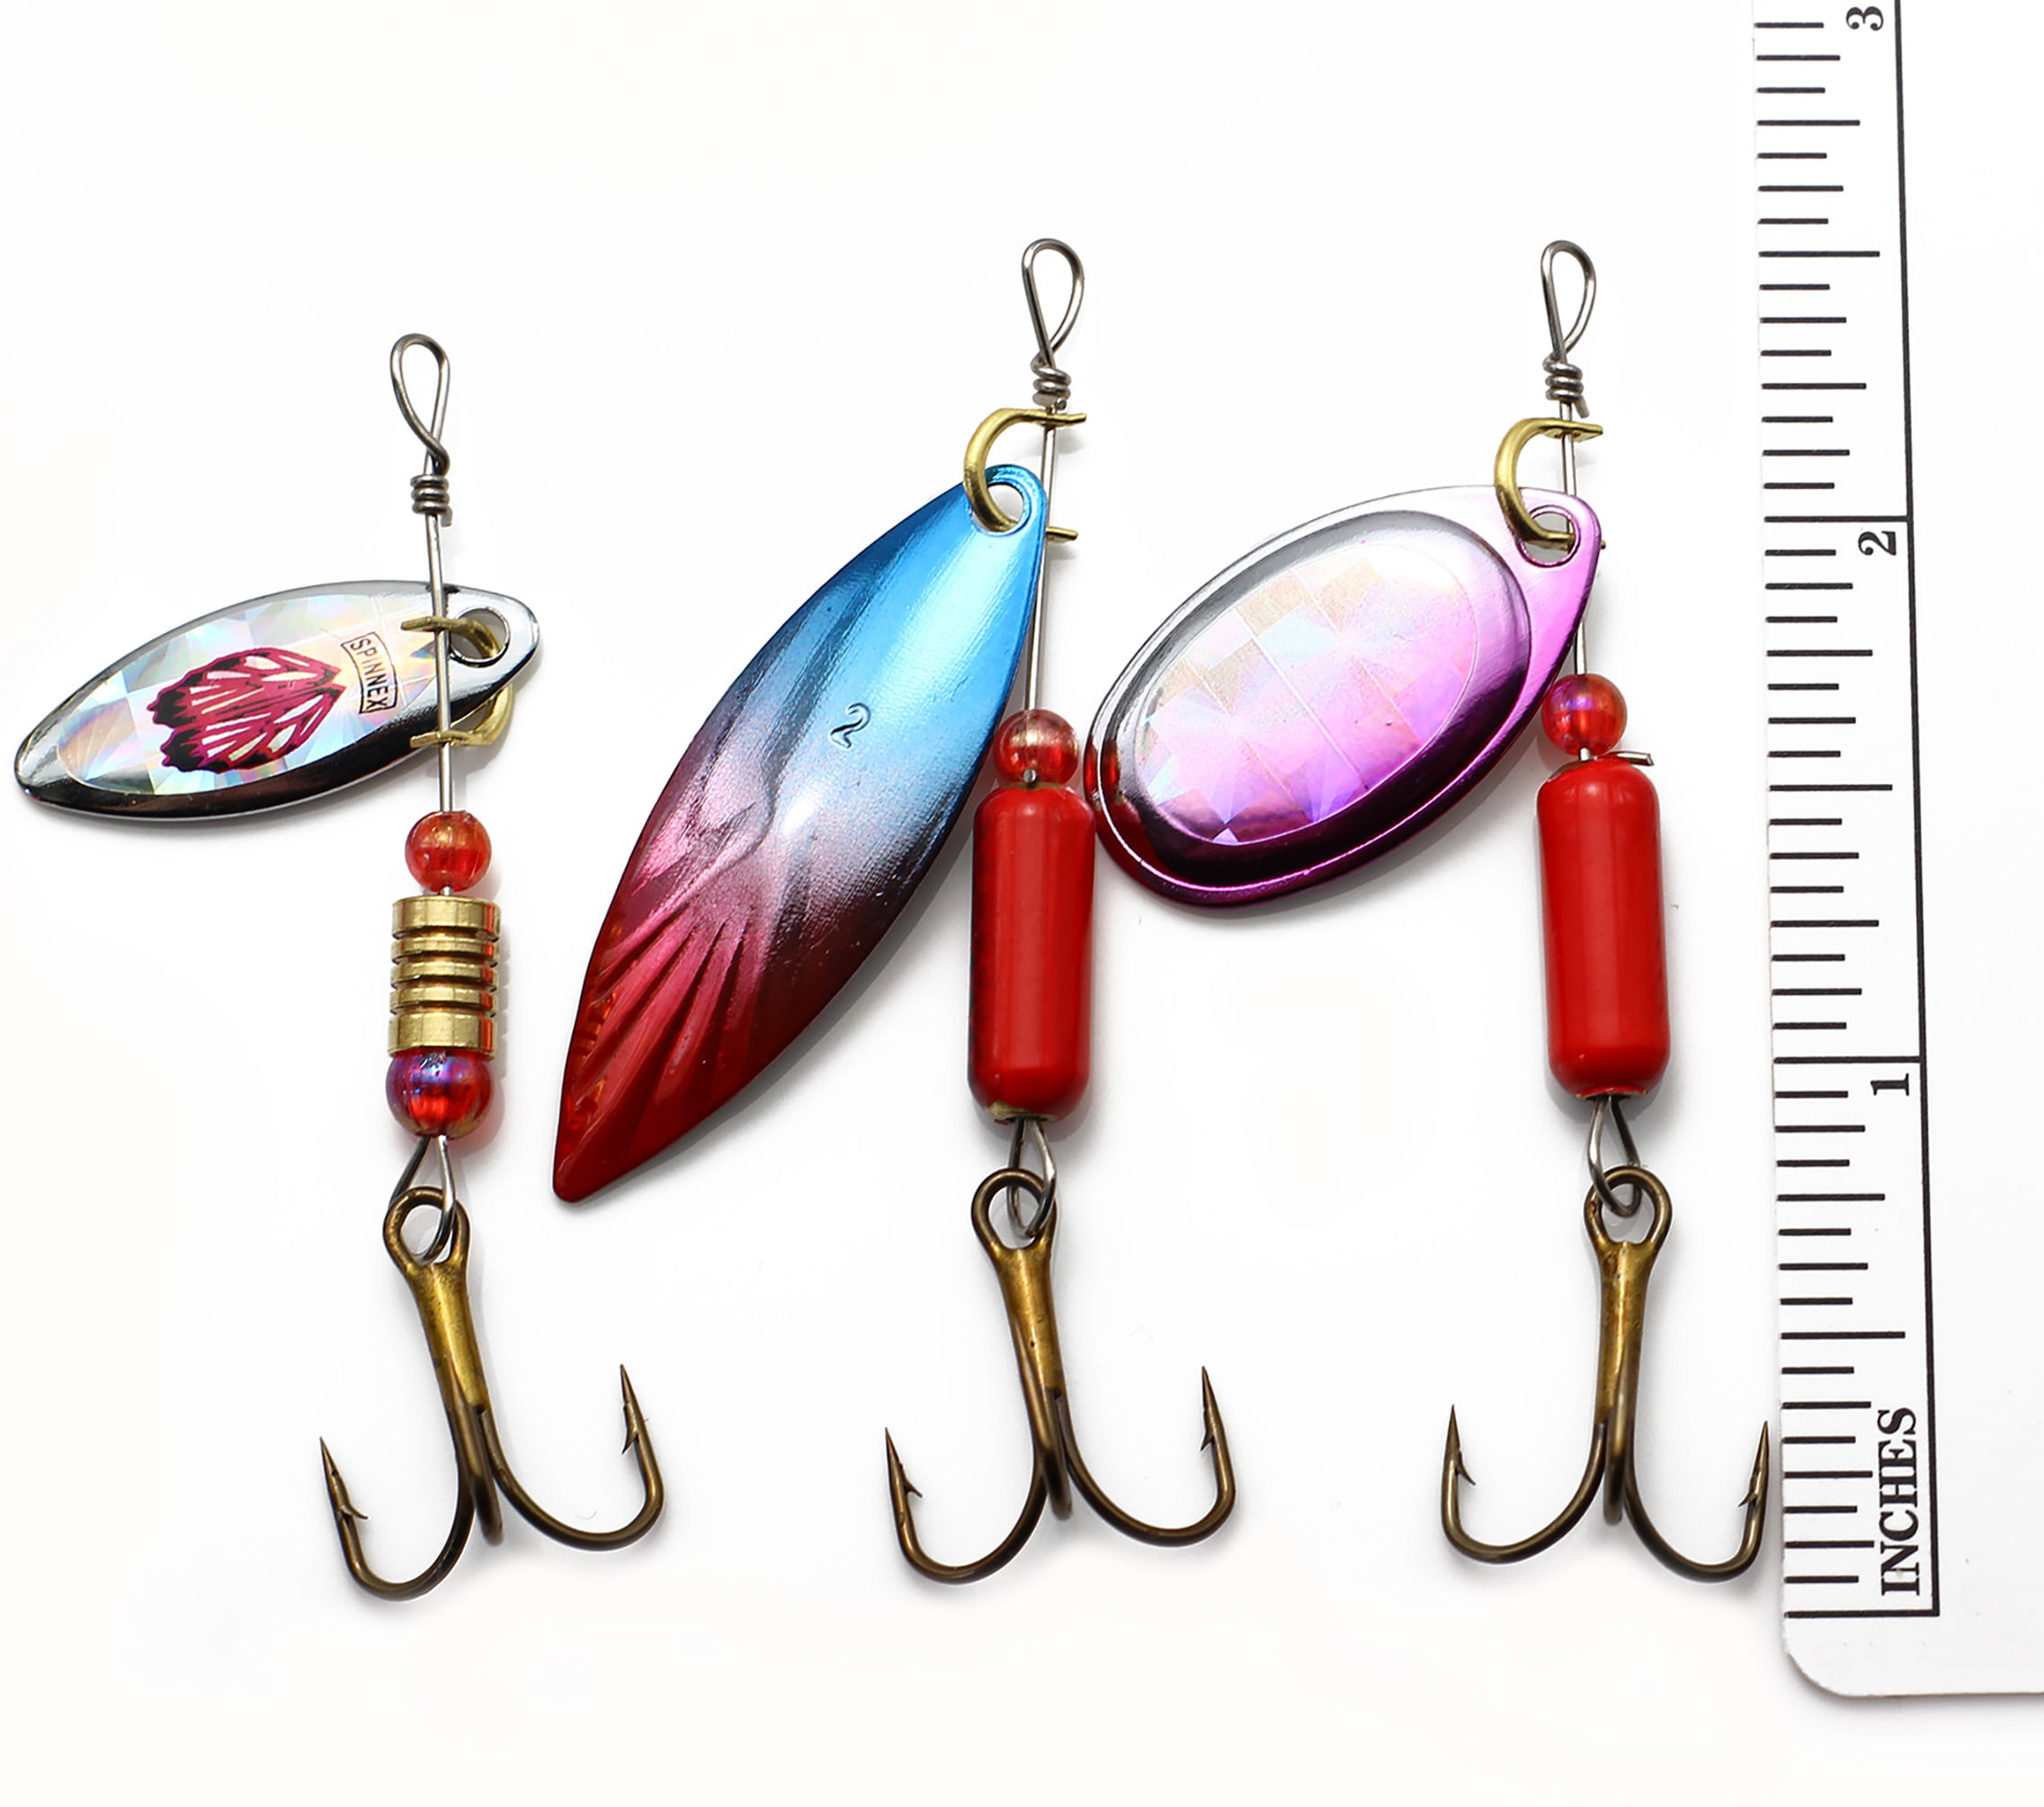 LotFancy Hard Metal Fishing Lures, 30 Spinner Baits with Tackle